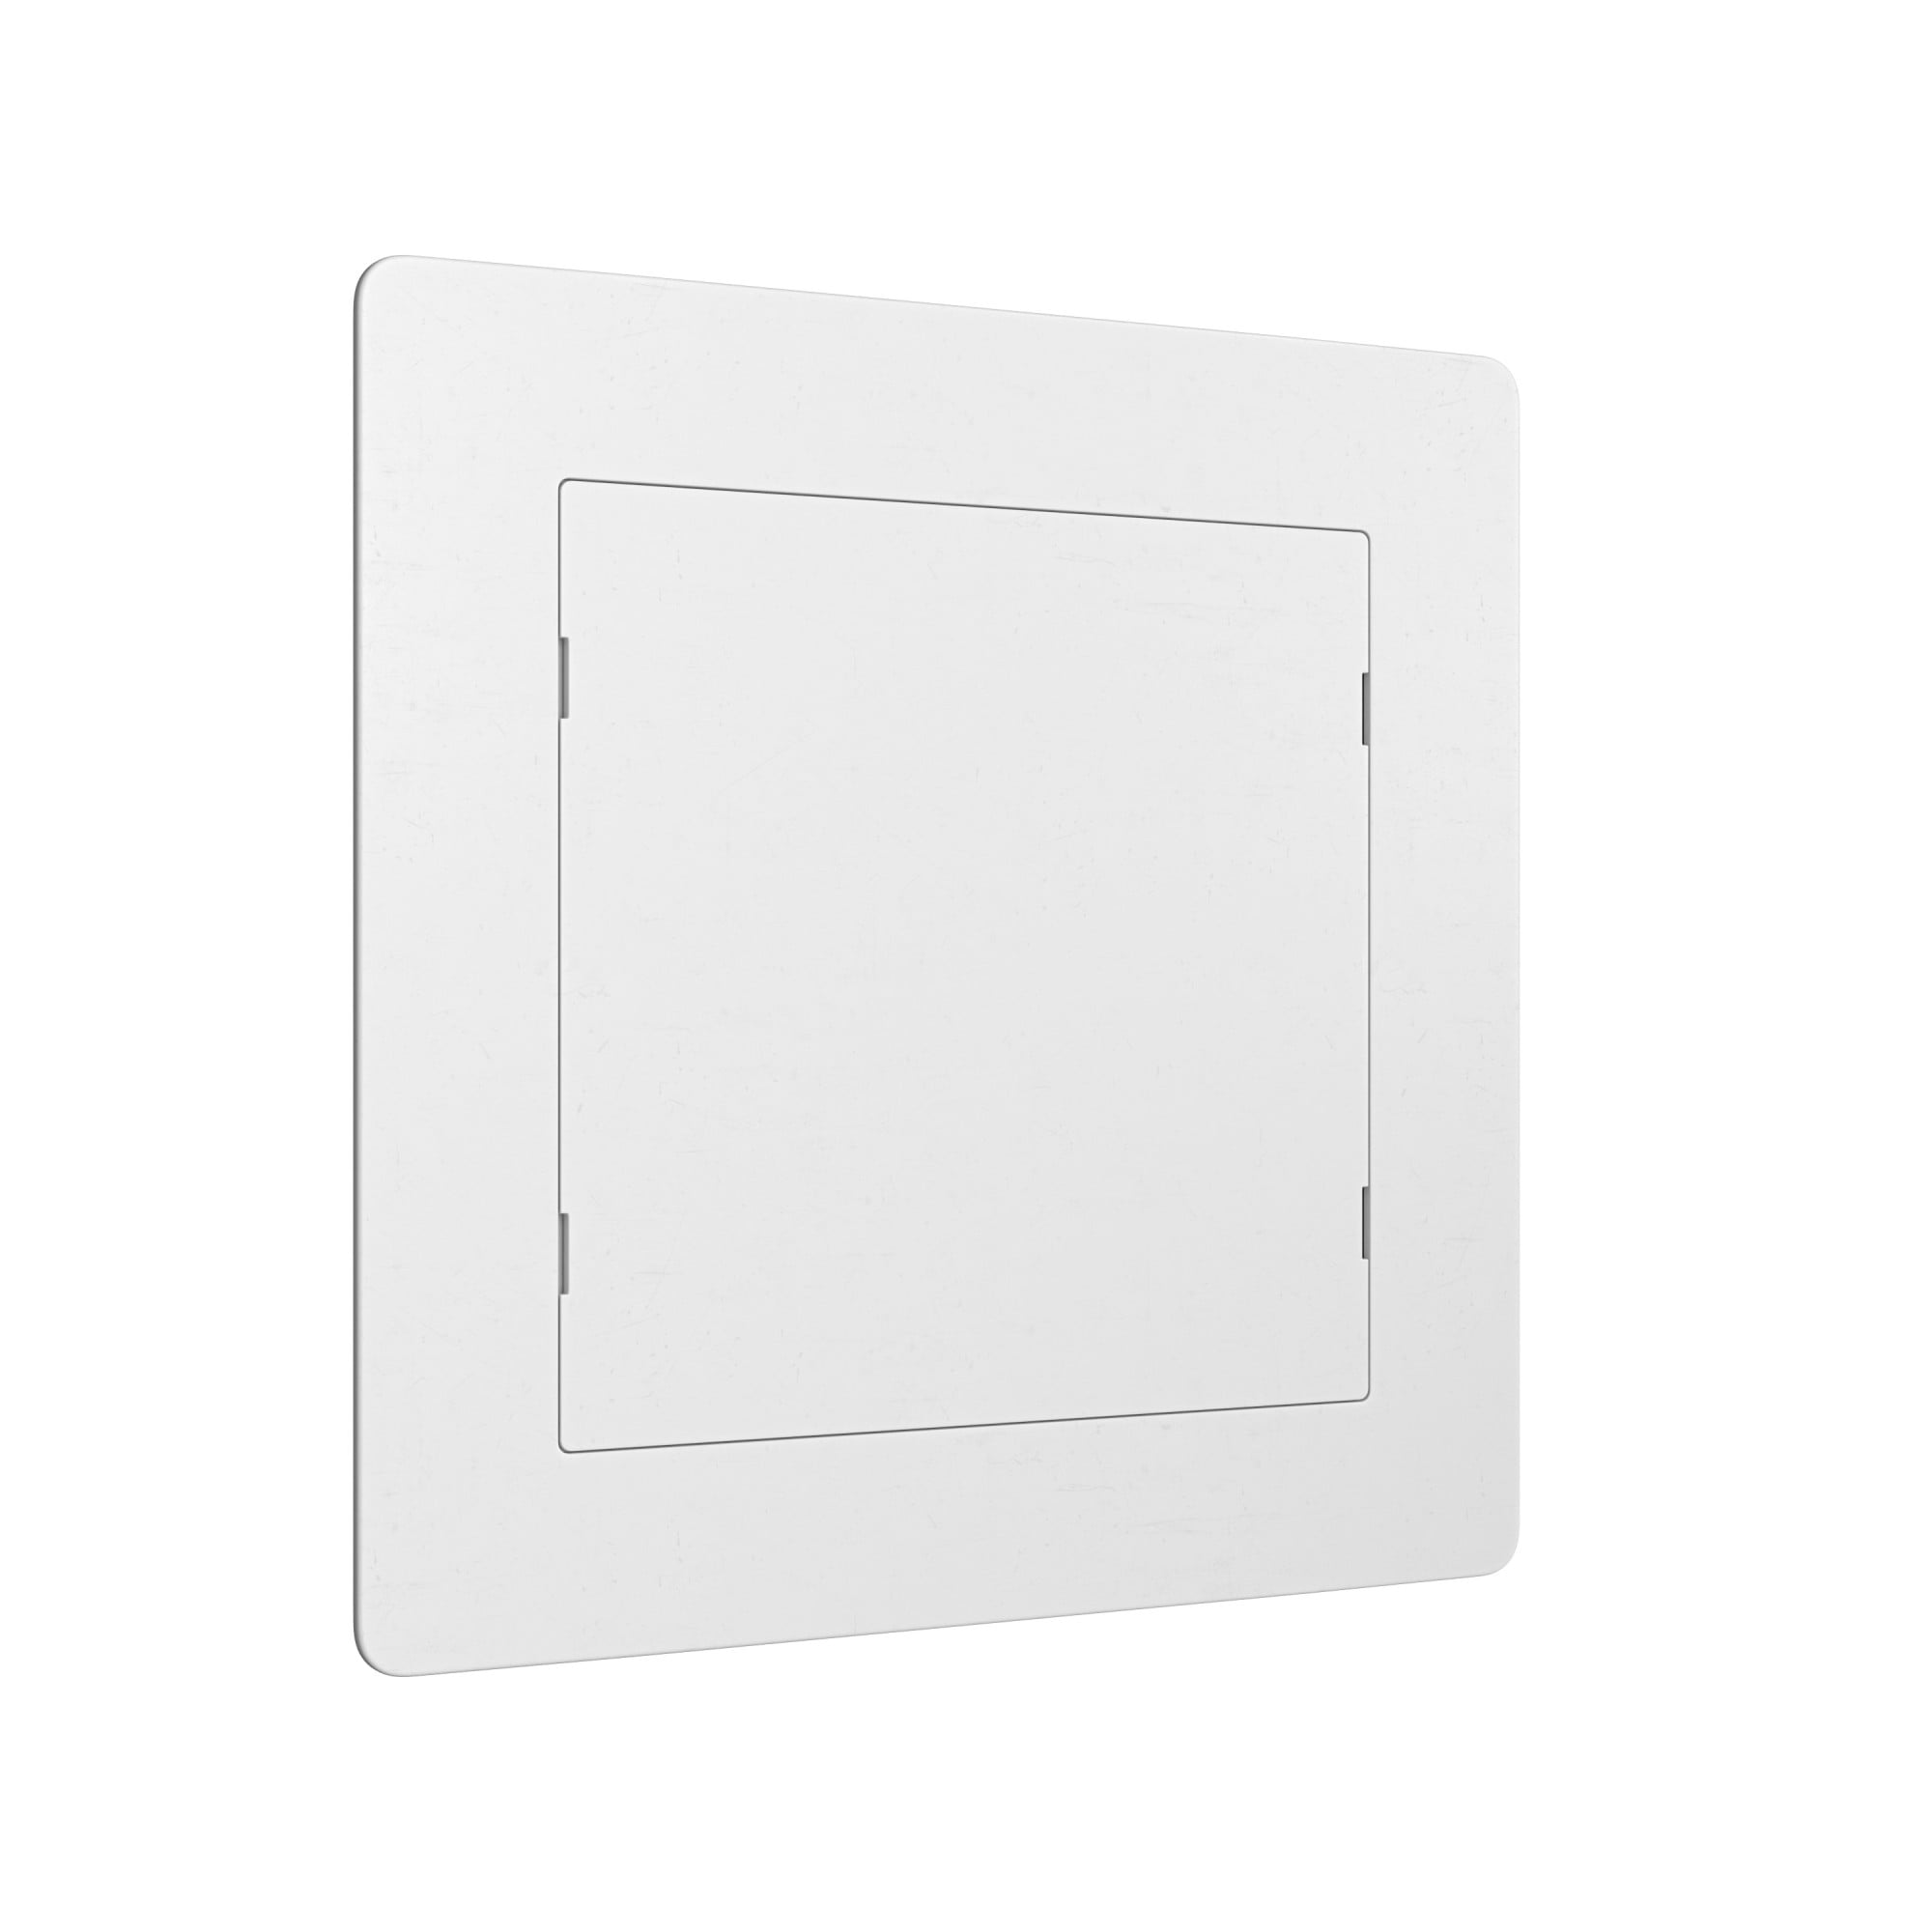 Jones Stephens A05-008 8 X 8 In. Snap-in Plastic Access Panel